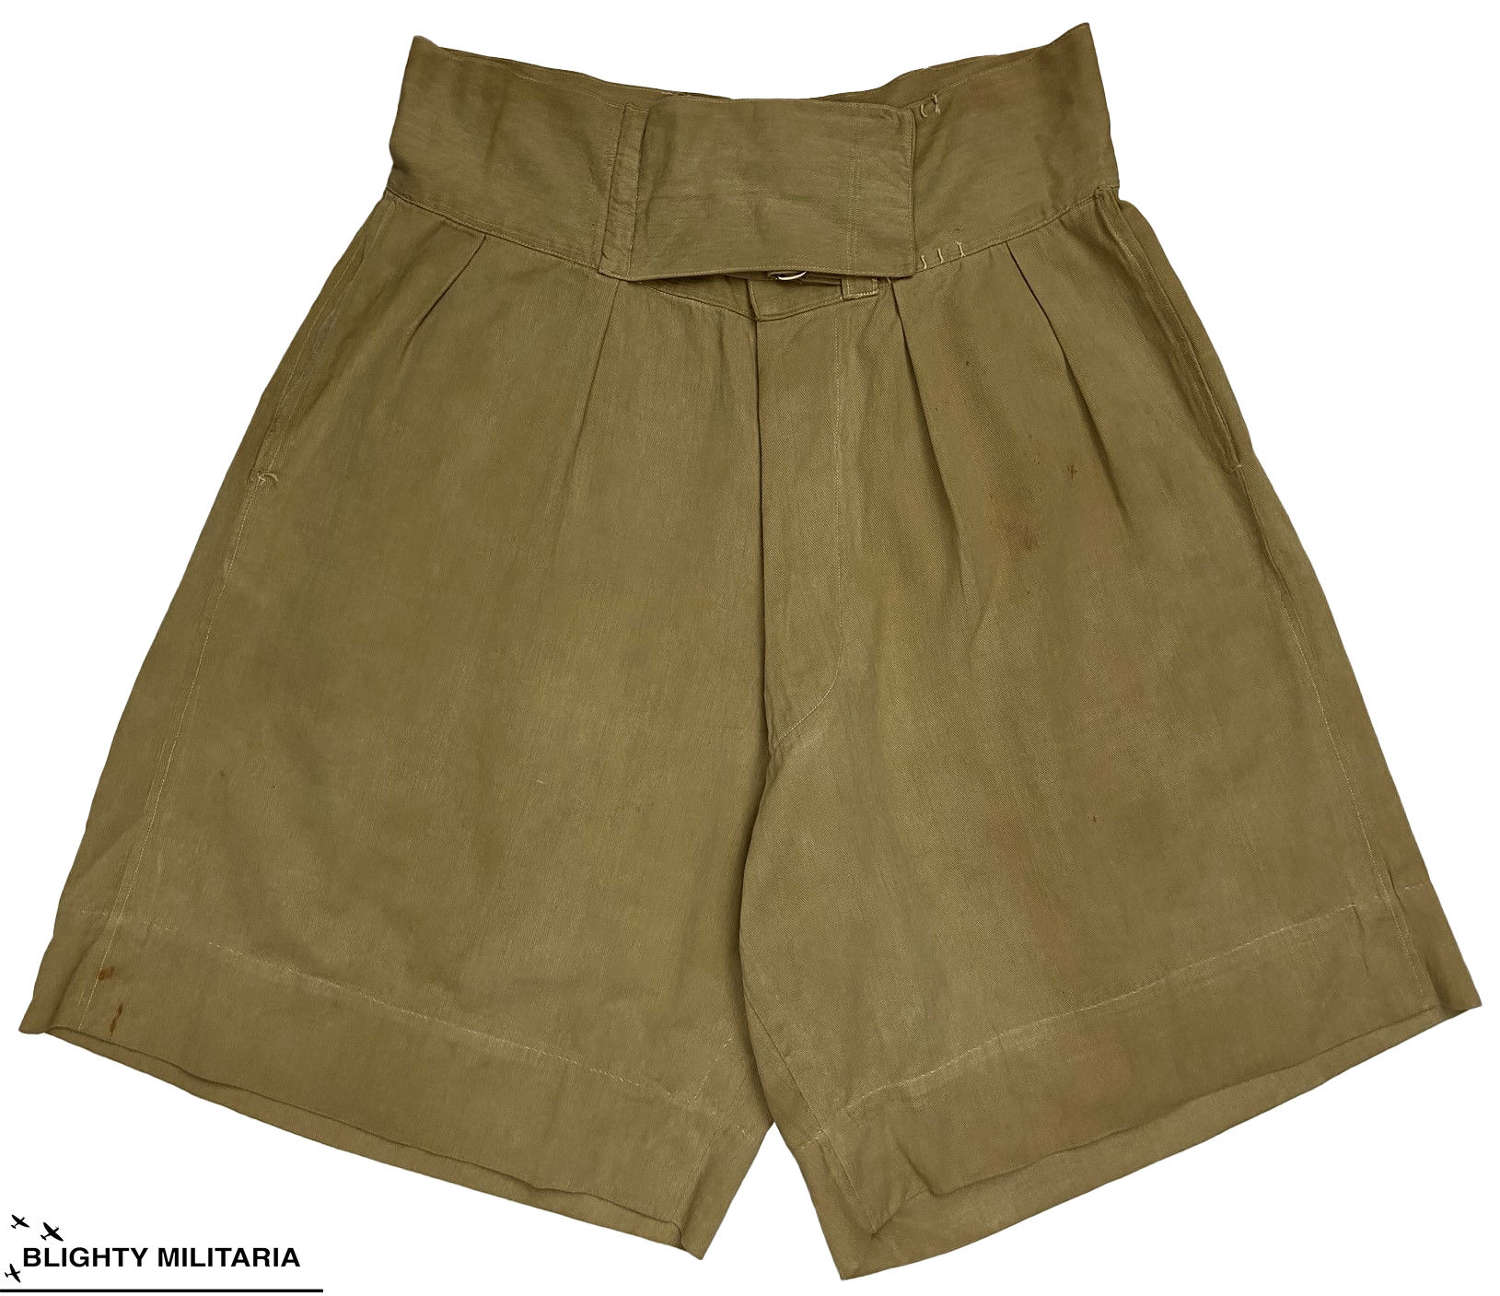 Original WW2 British Army Officers Private Purchase Khaki Drill Shorts